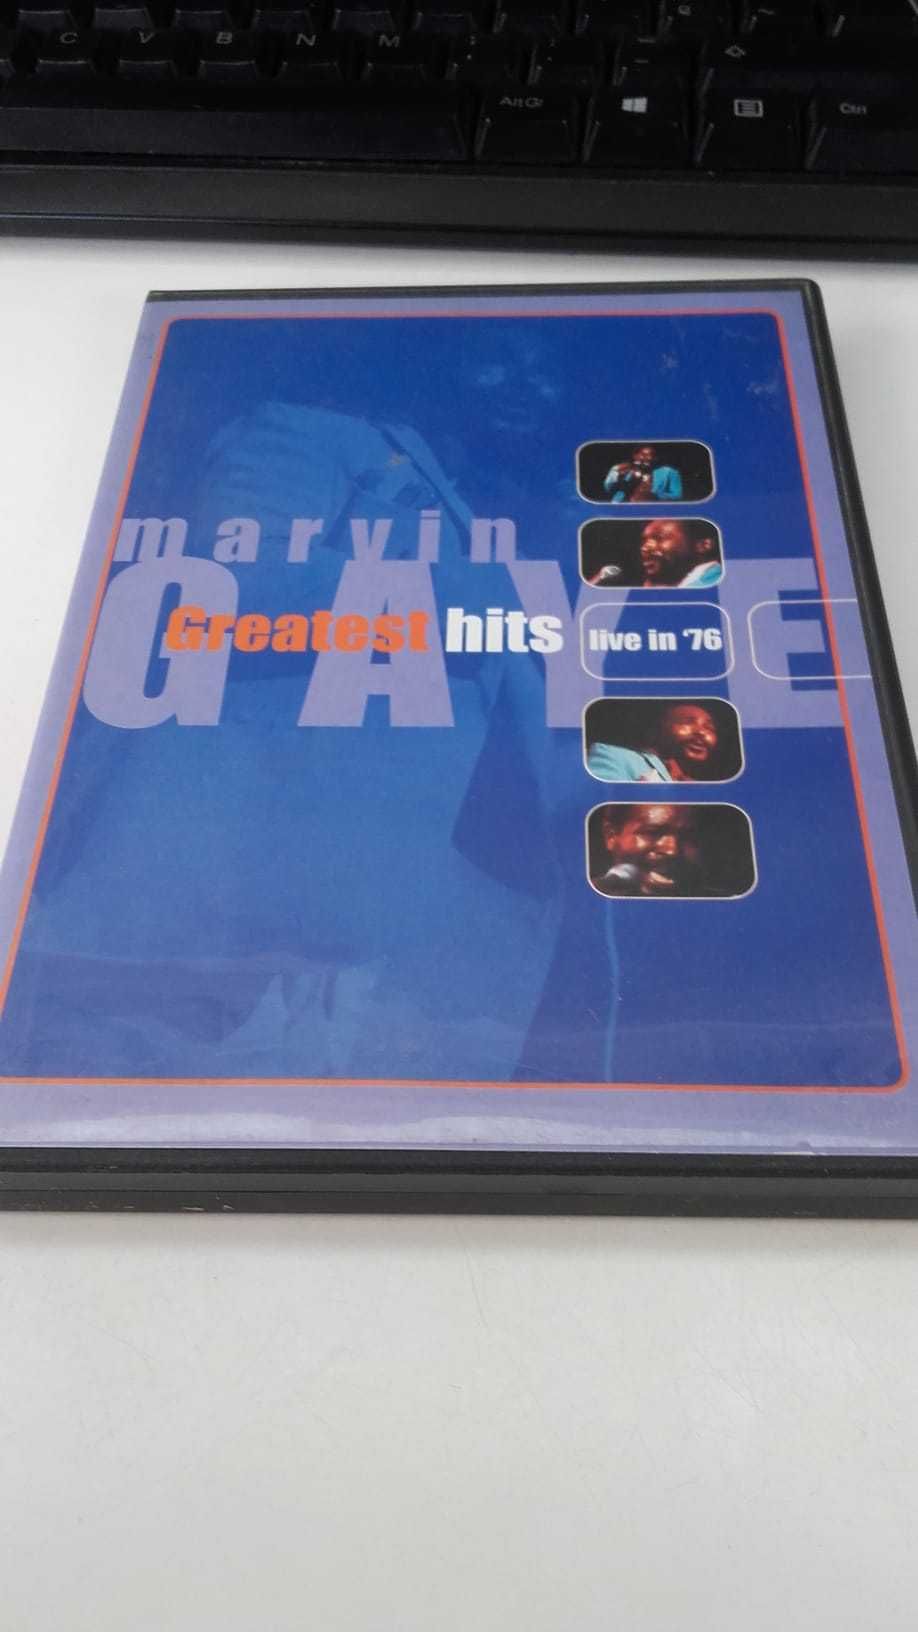 CD E DVD Concerto Westlife E Greatest Hits Marvin Gaye Live 76